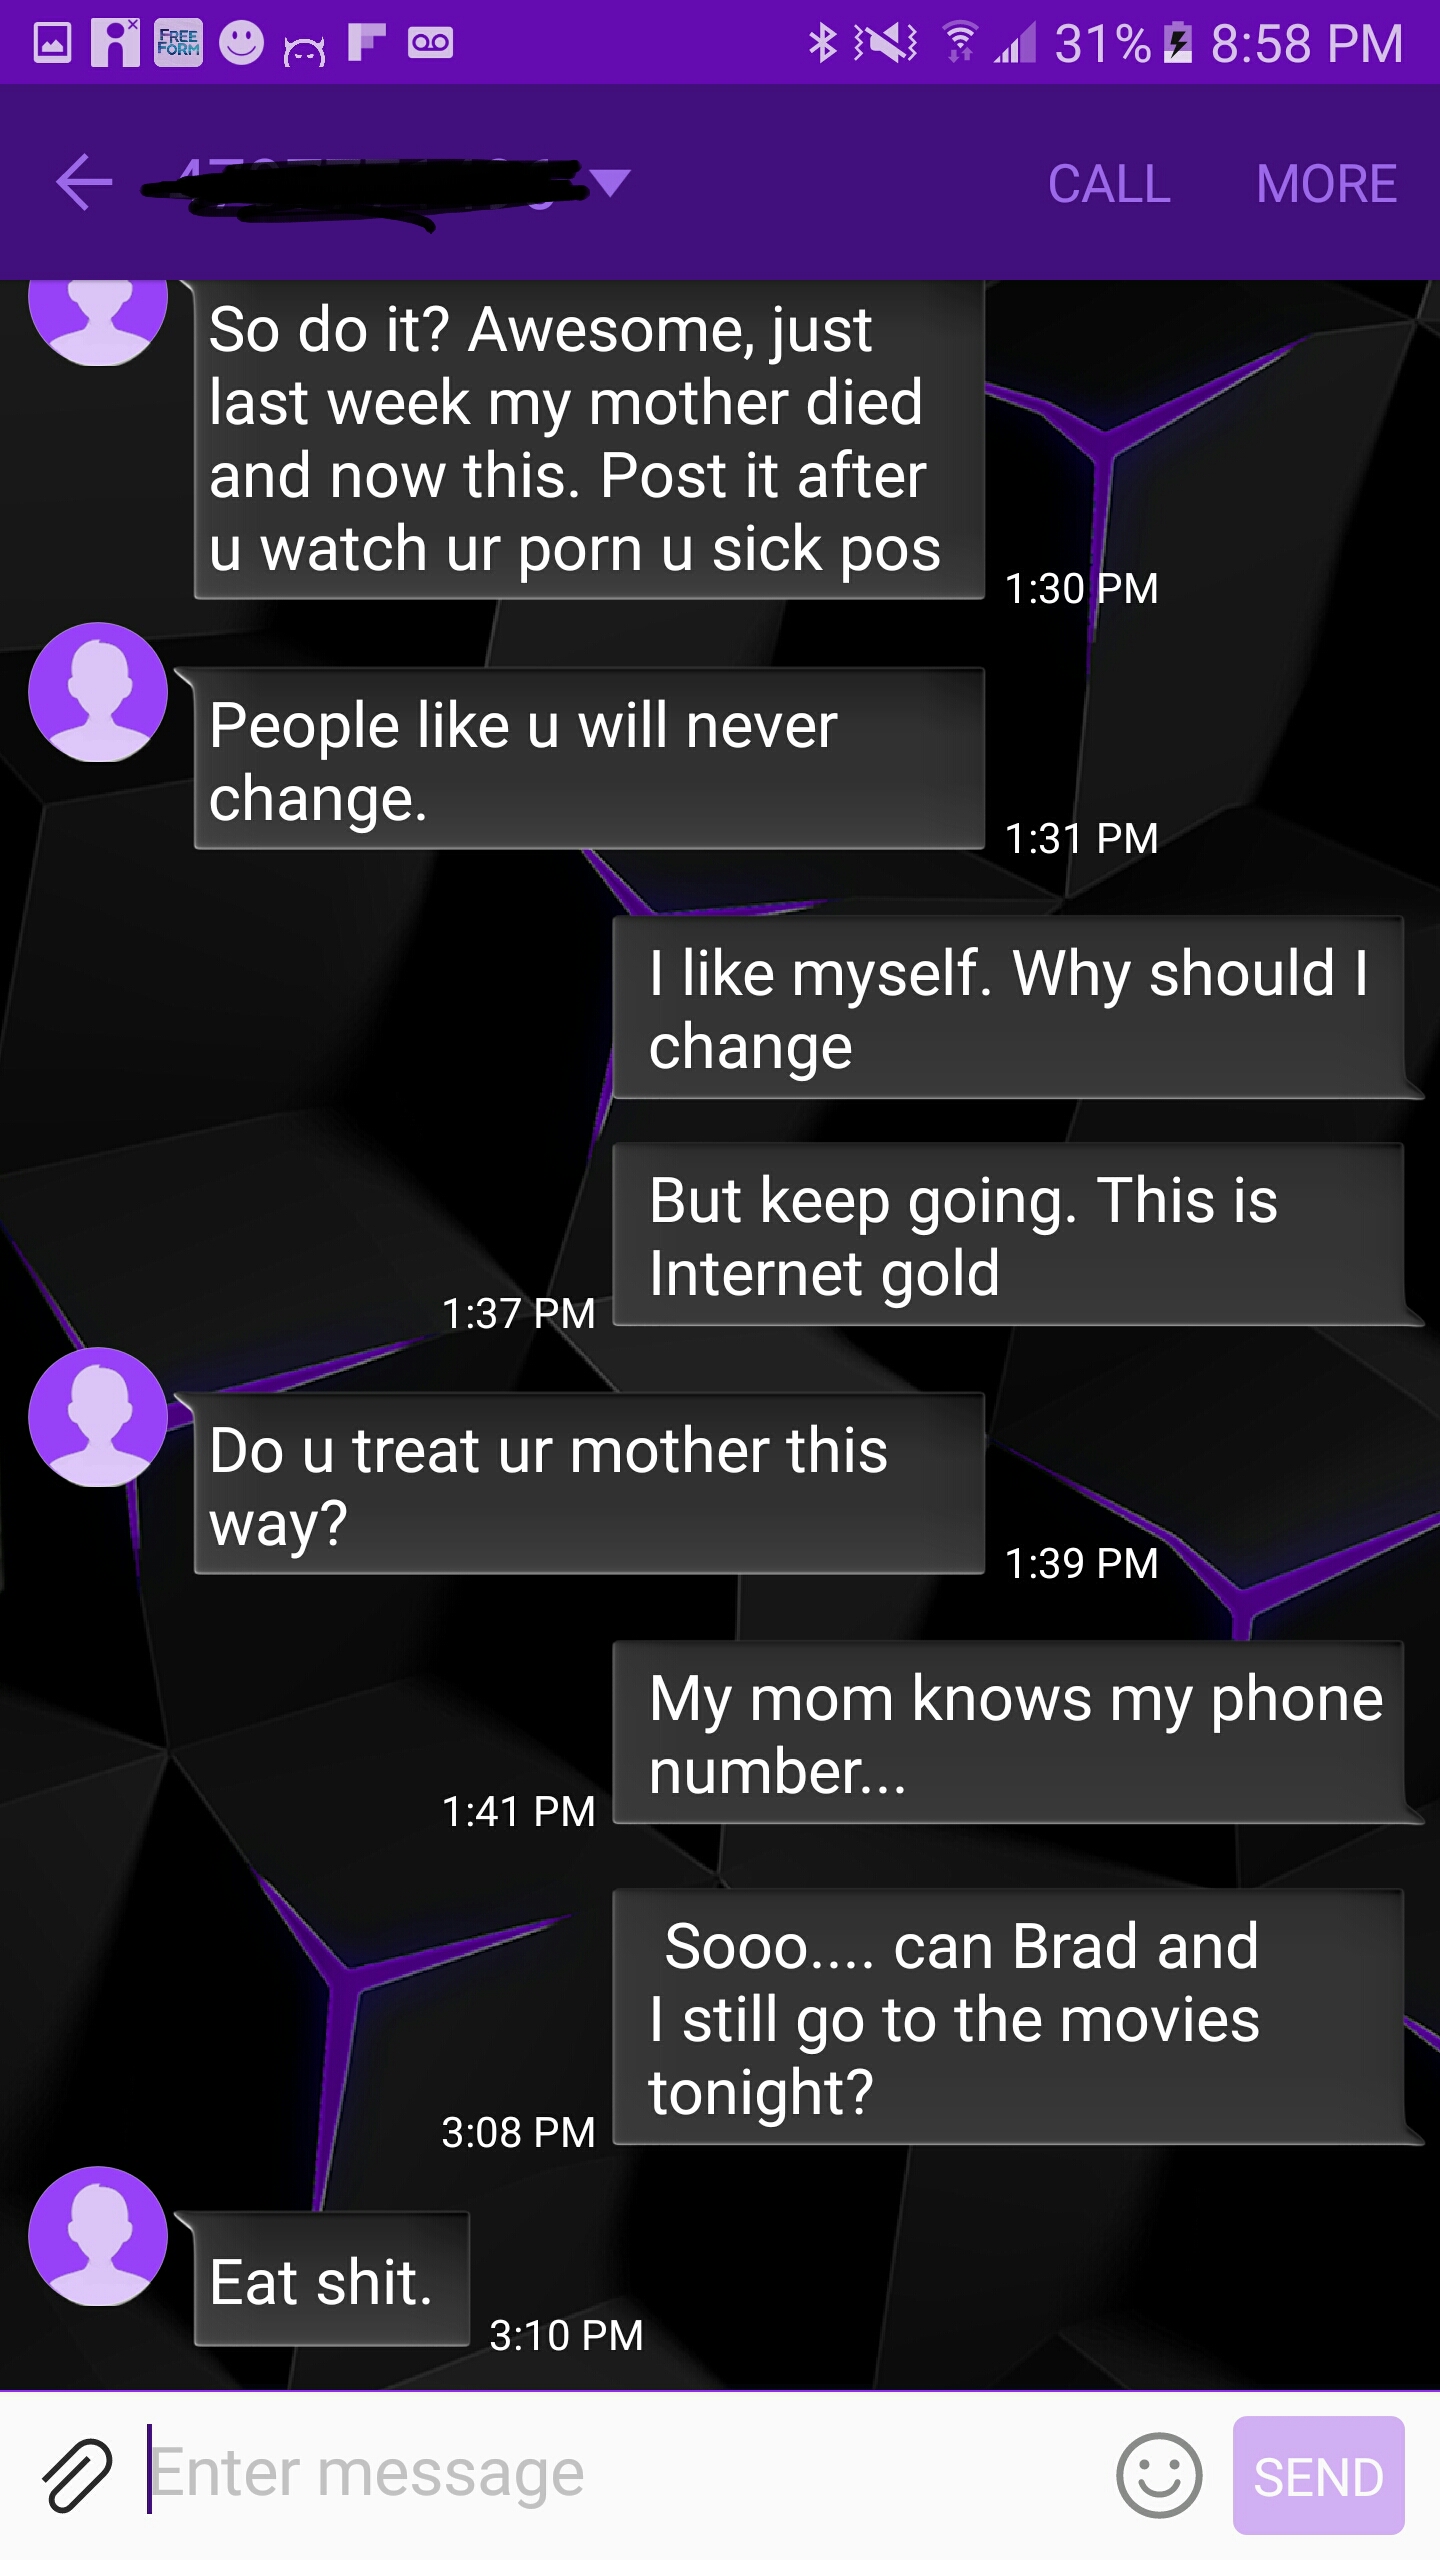 When Texting A Wrong Number Goes... In A Full Cringe Mode